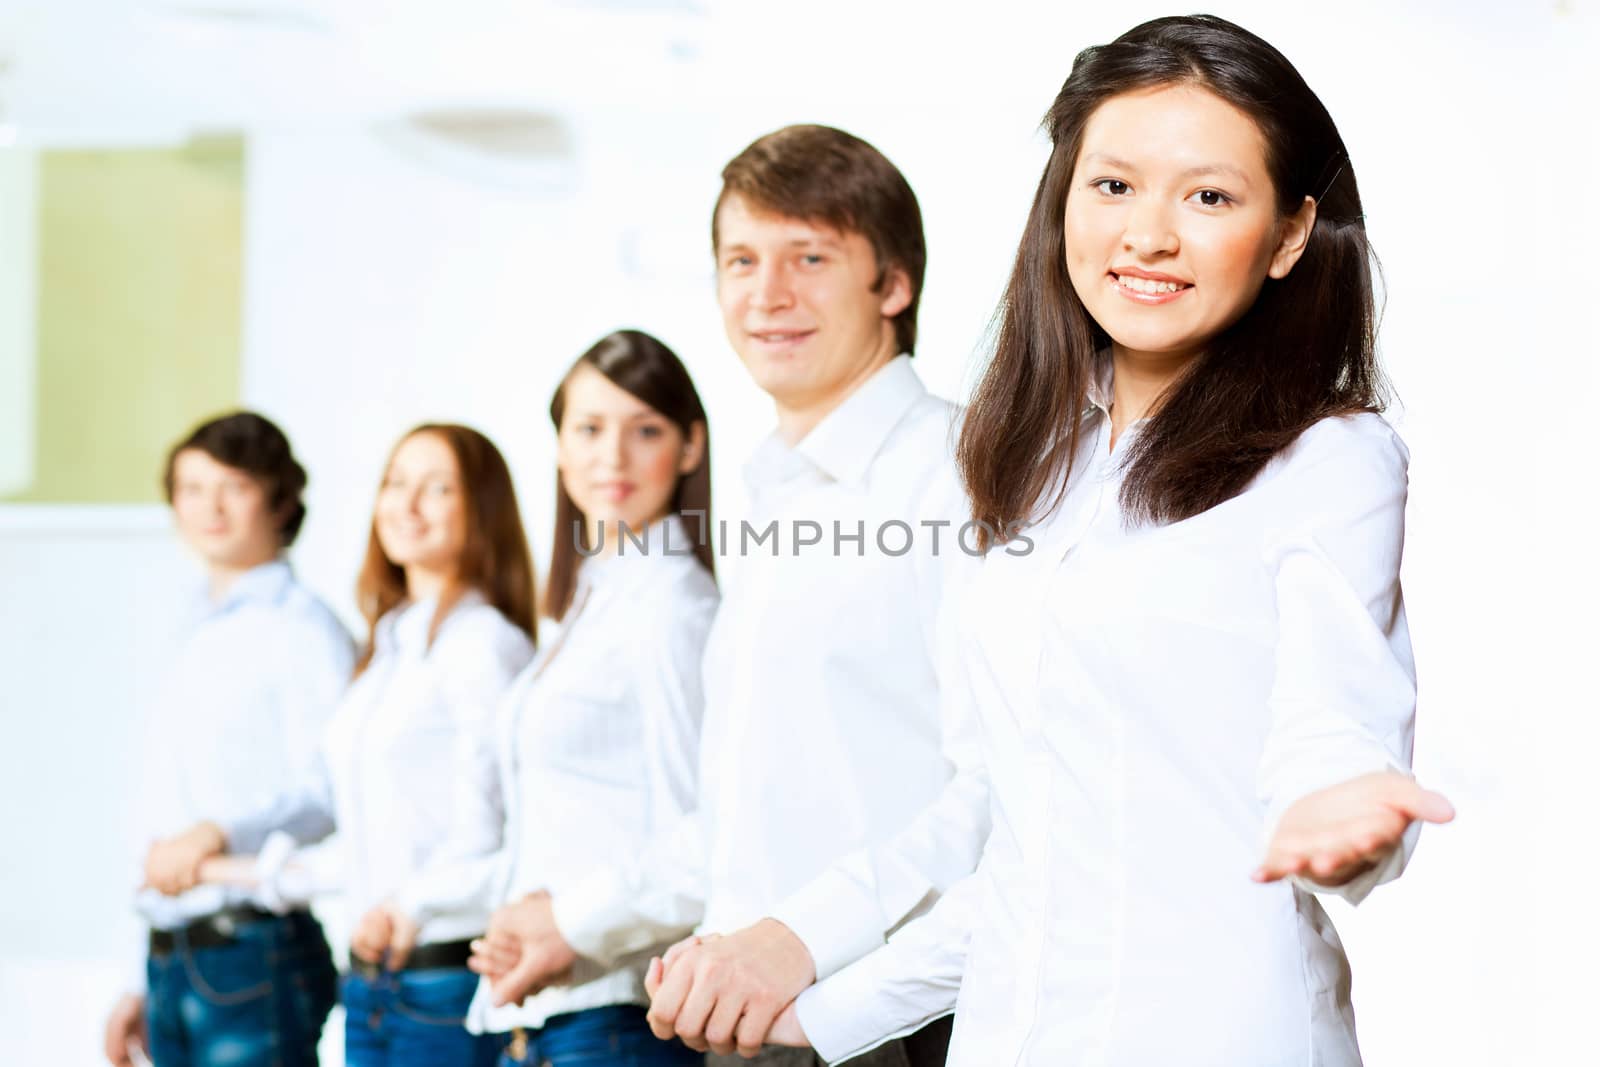 Image of five students in casual wear standing in row